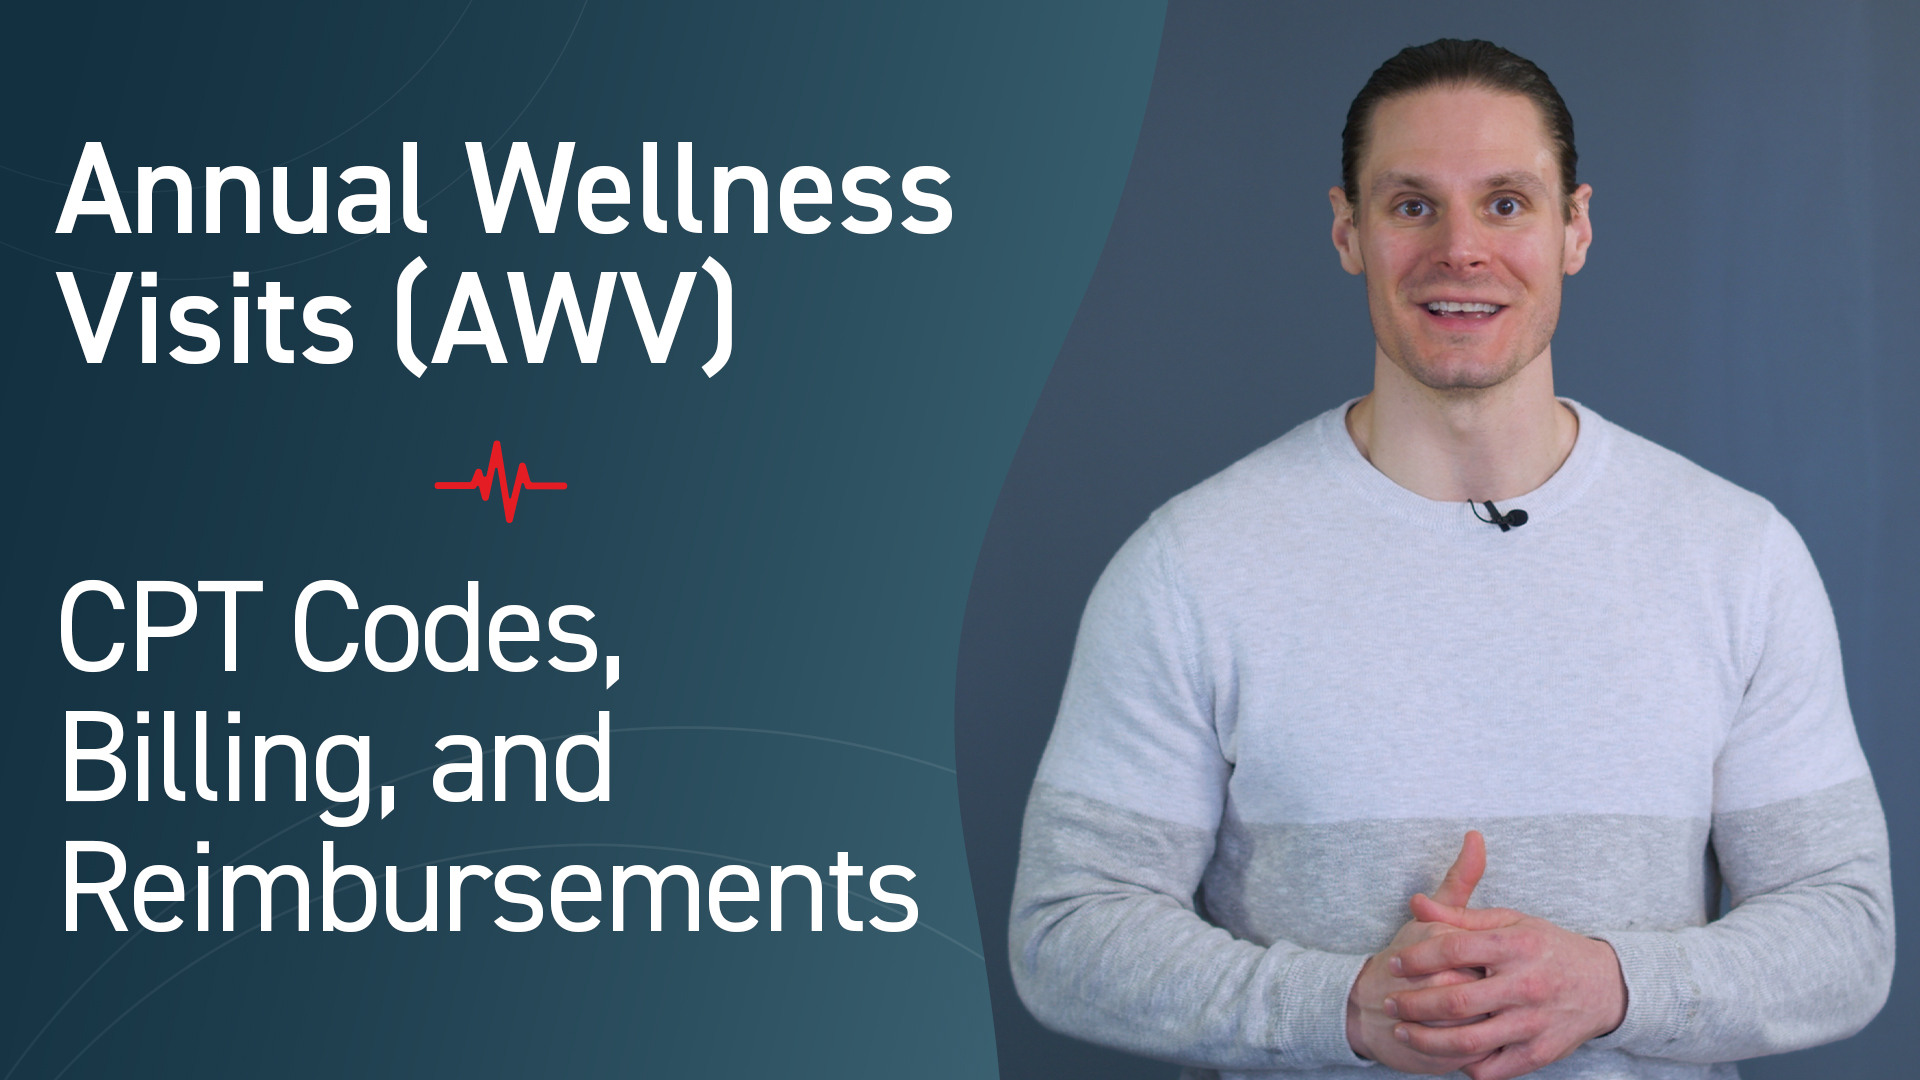 Annual Wellness Visits (AWV): CPT Codes, Billing, and Reimbursements